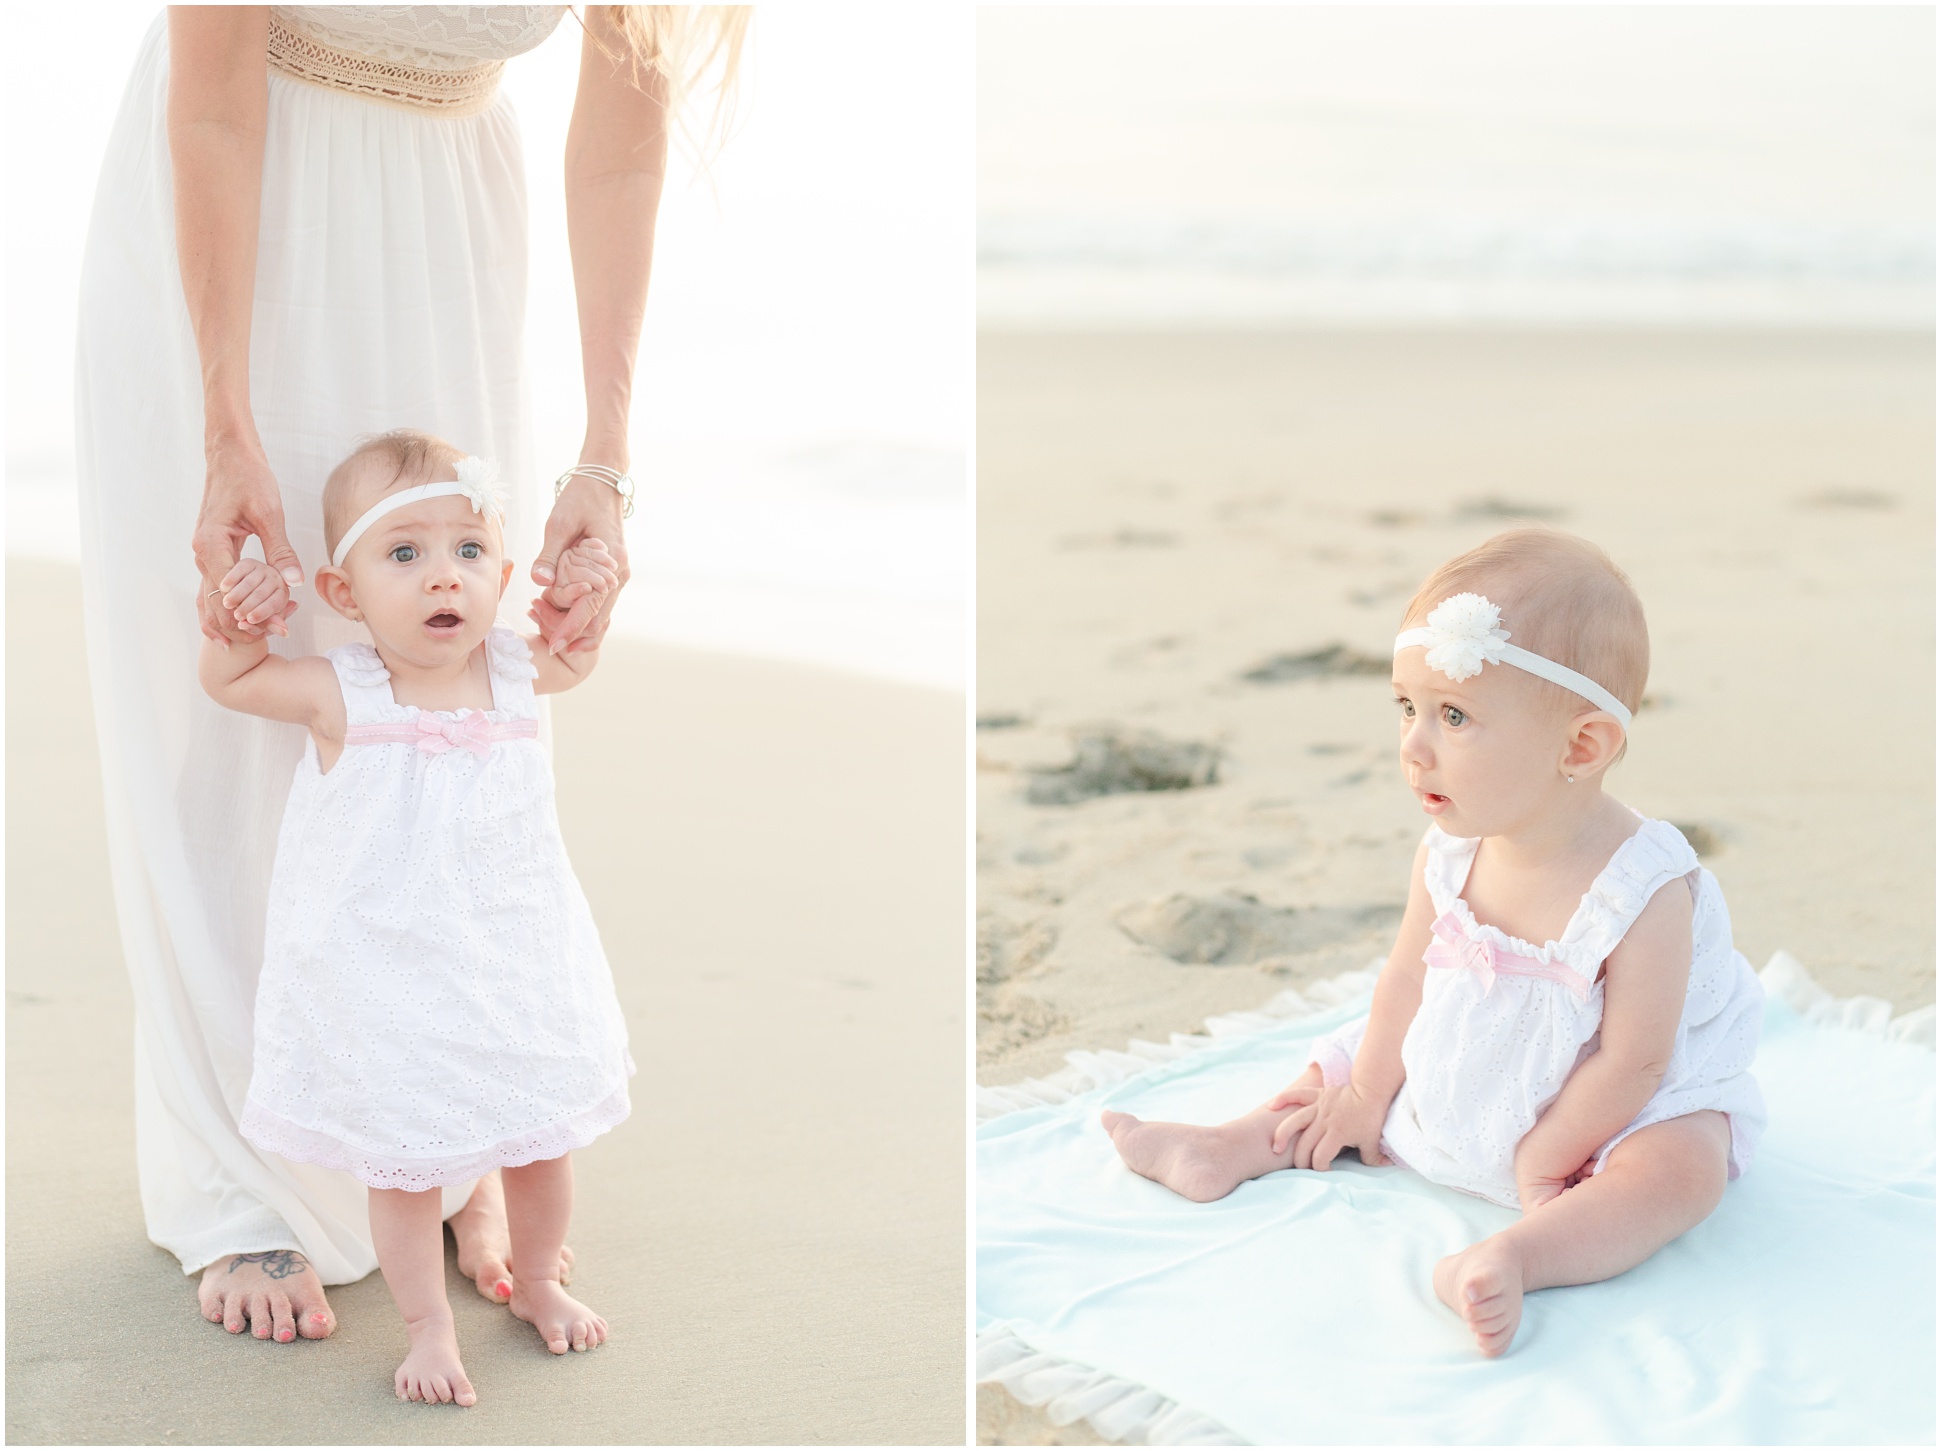 Left: Lily standing up like a big girl on the sand, Right: Lily sitting on a blue blanket on the beach